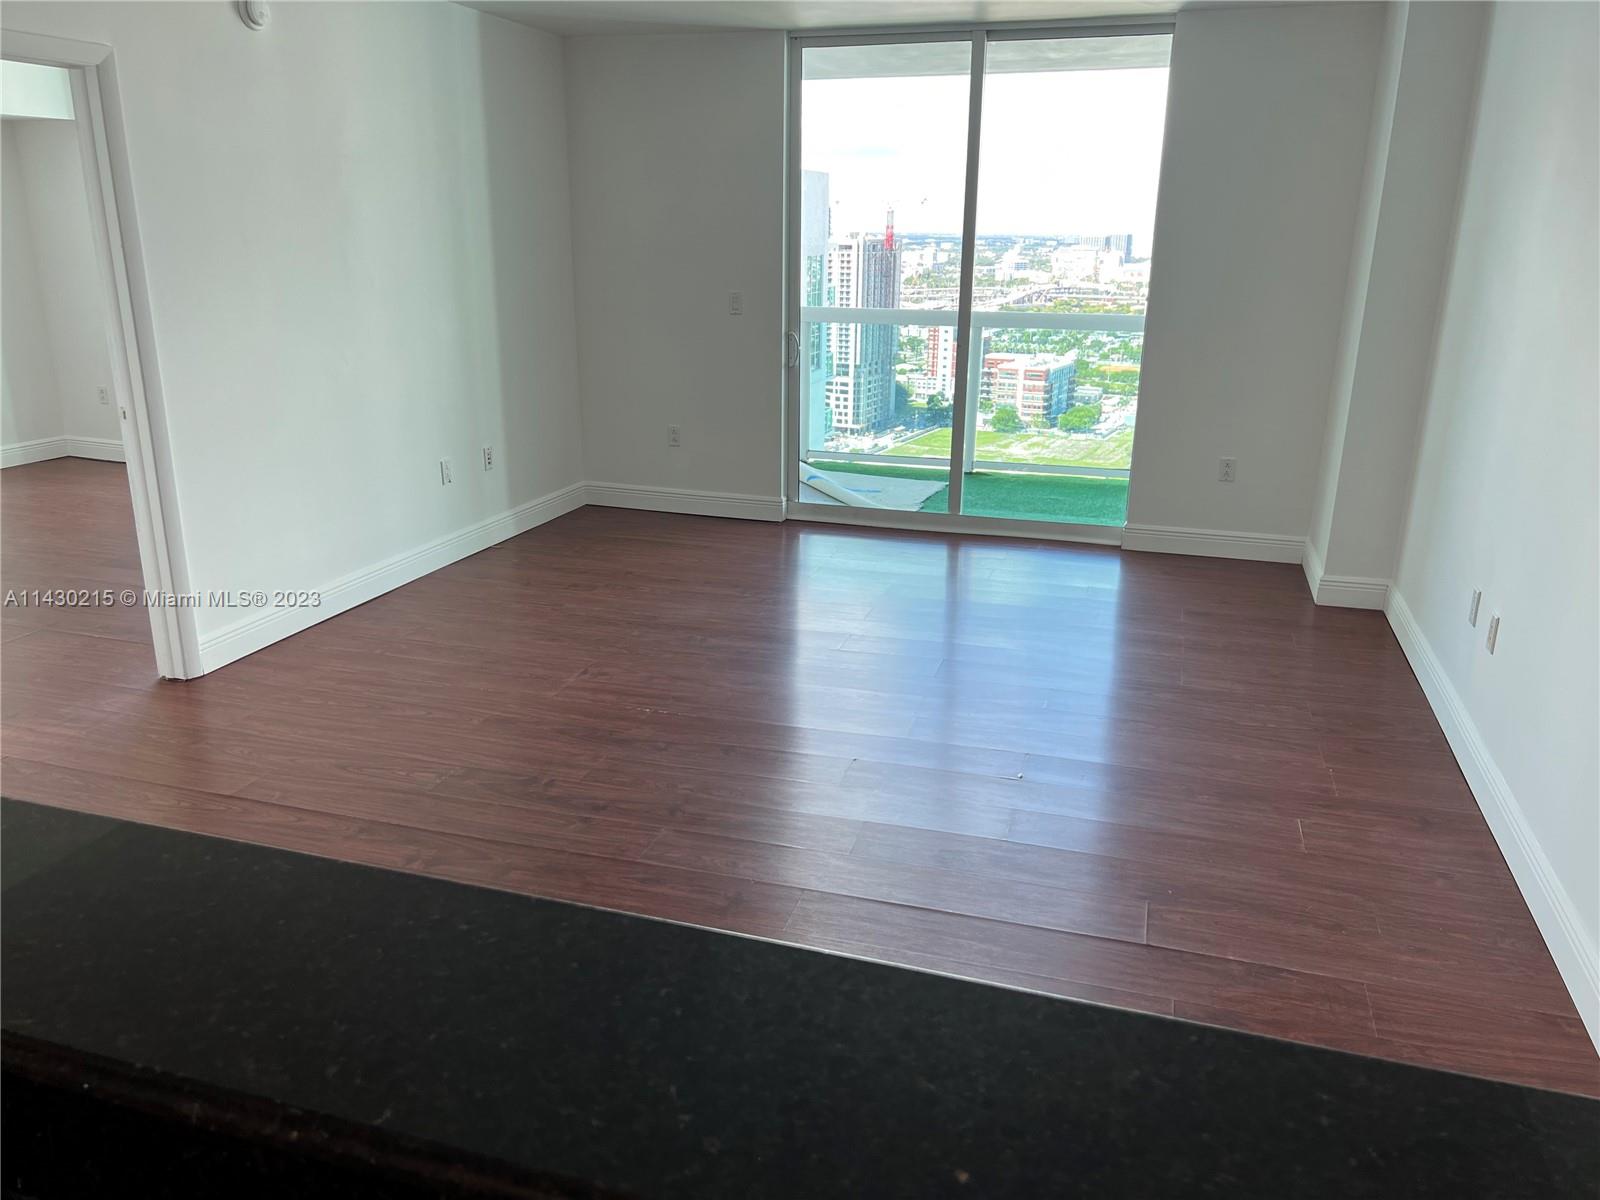 Beautiful city and sunset views from this 1bdr/1bath unit on the 39th floor. Building itself offers 5 star amenities. Just across Margarete Pace park, 2 blocks from Publix supermarket. Superb location. A must see.